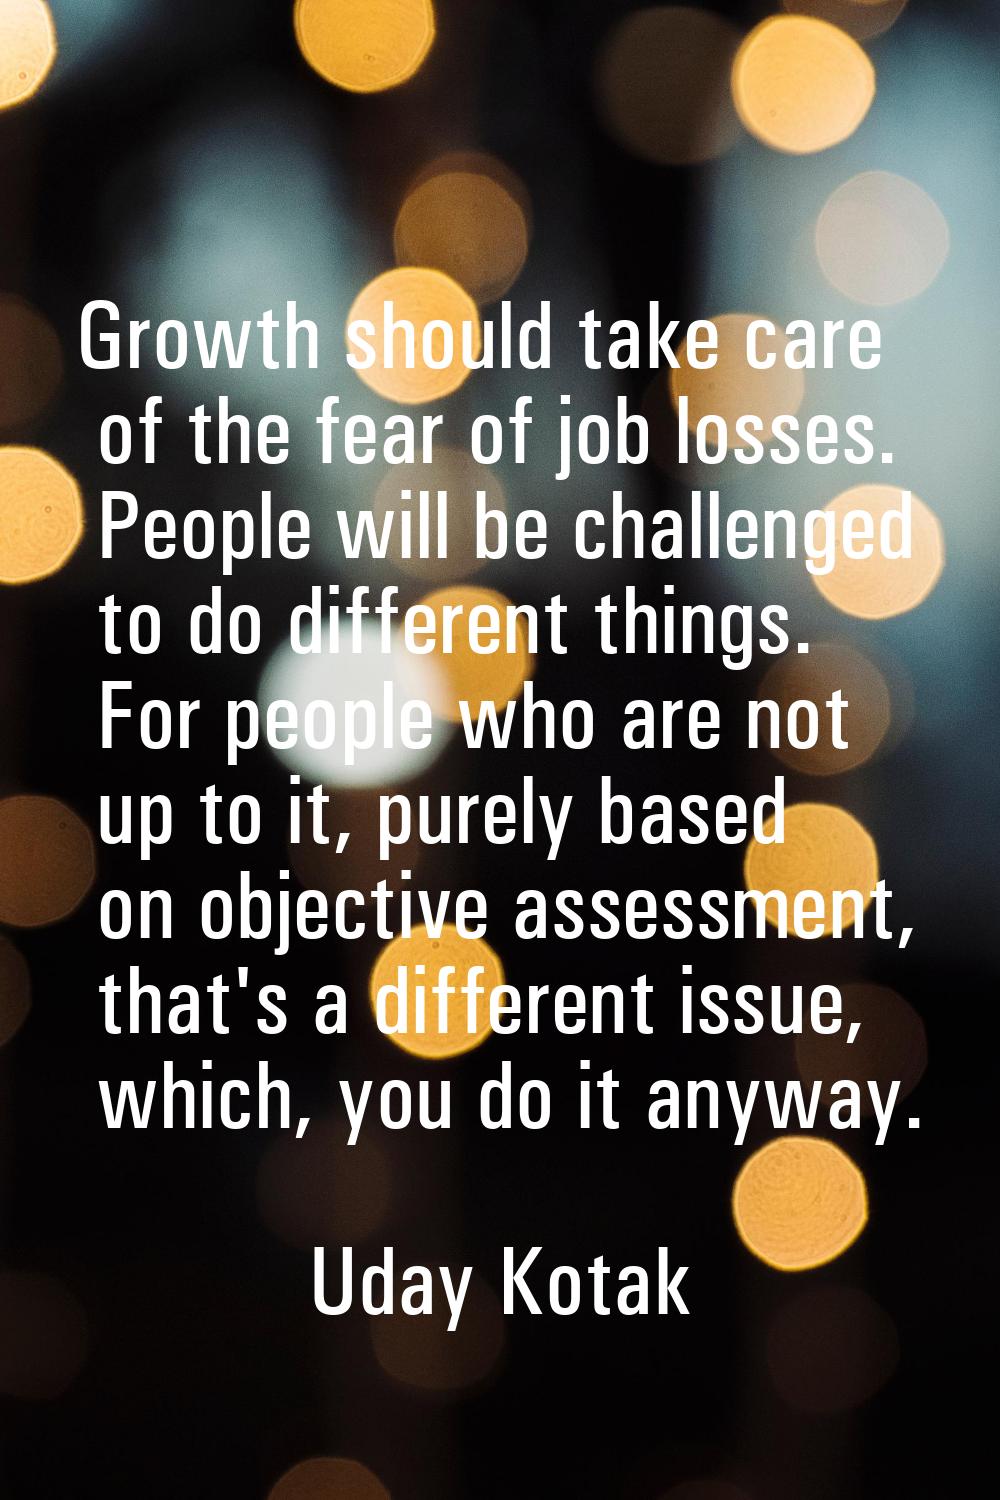 Growth should take care of the fear of job losses. People will be challenged to do different things